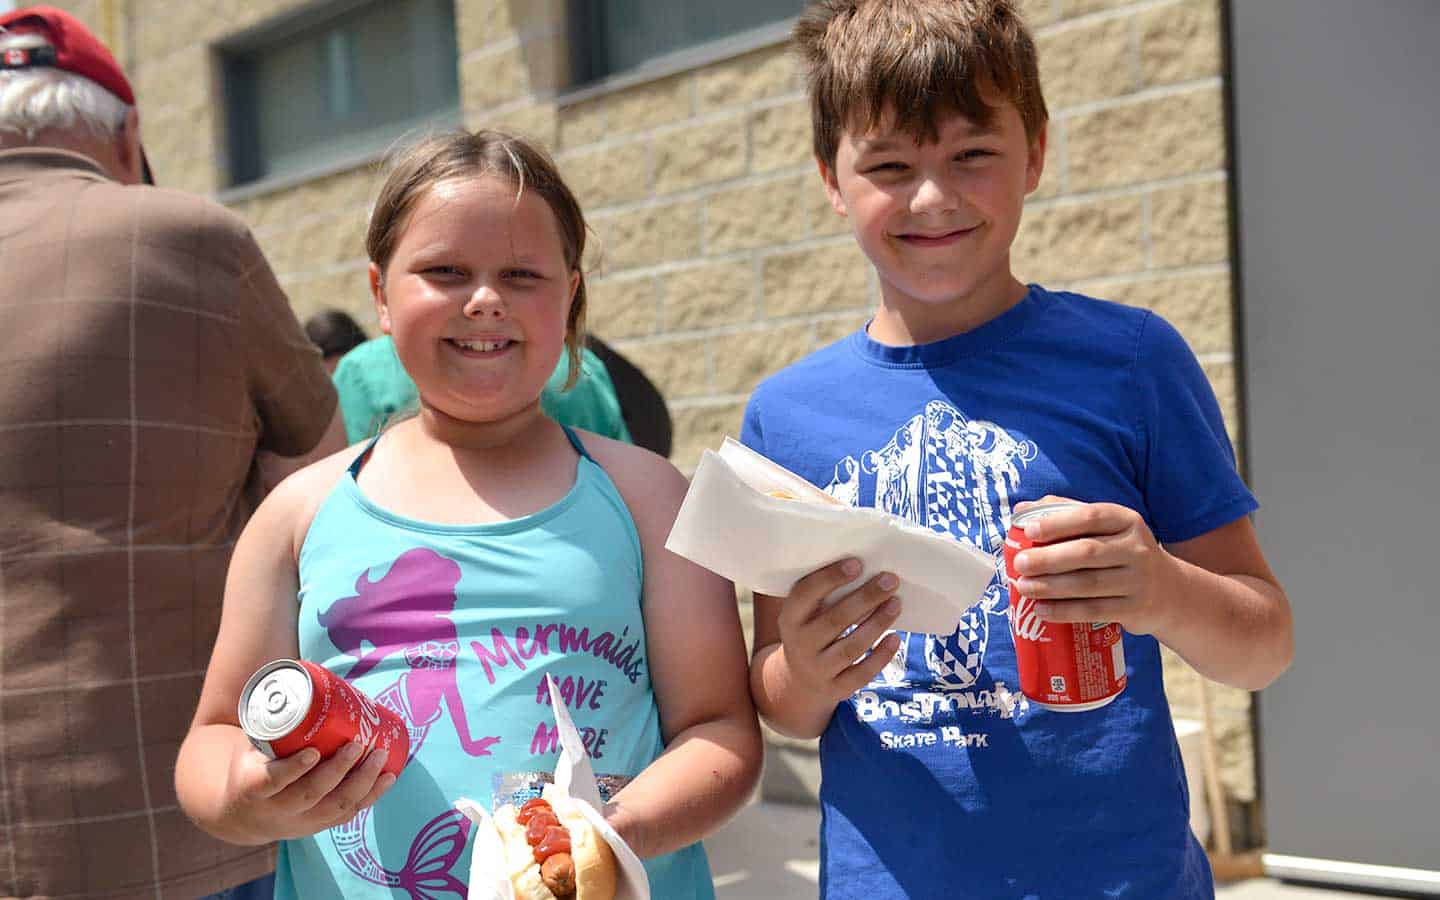 Hot dog! Summer bring plenty of extra offerings from WCS